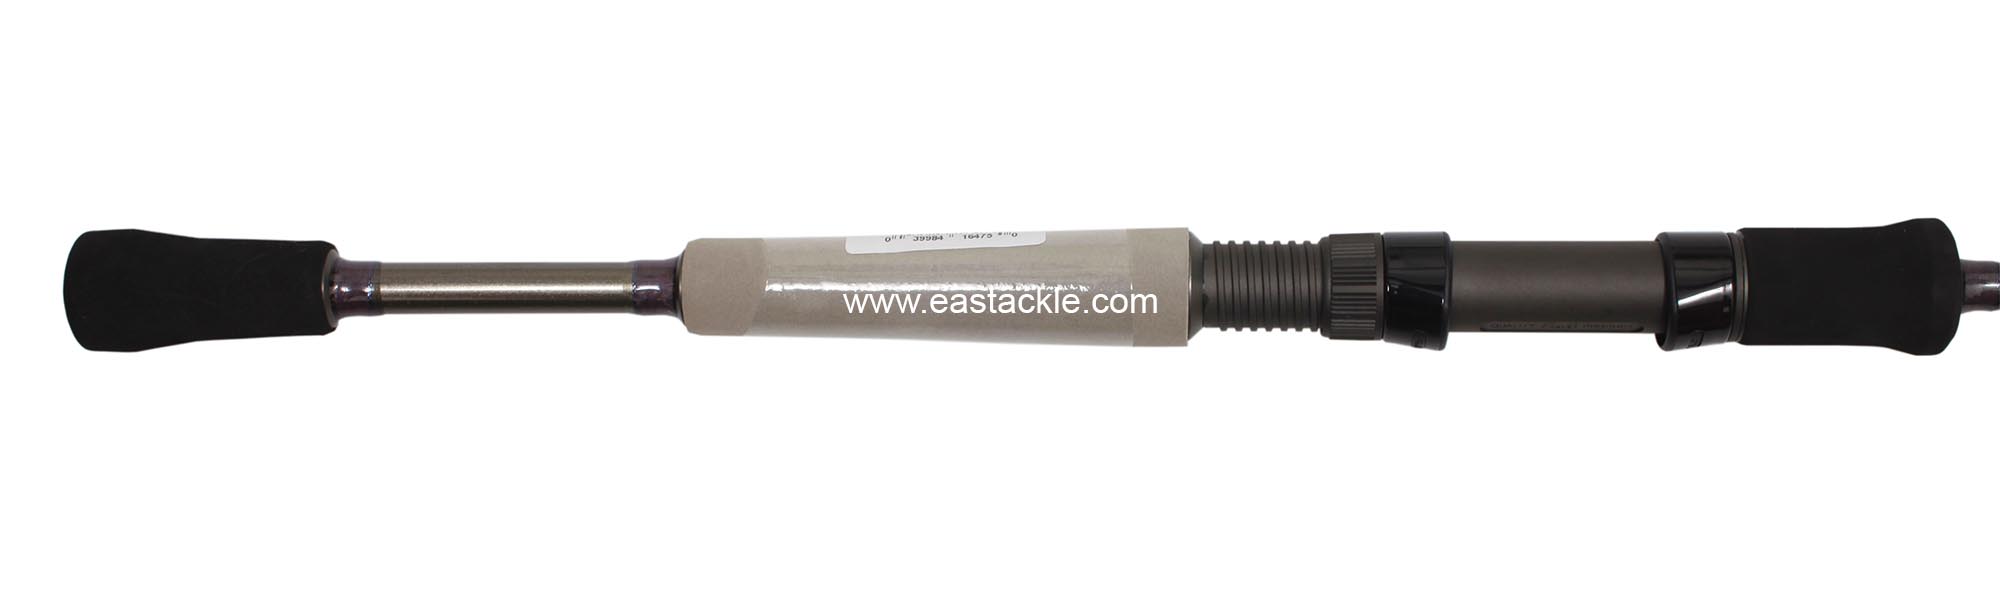 Storm - Adventure - AVS662MLX - Spinning Rod - Handle Section (Side View) | Eastackle